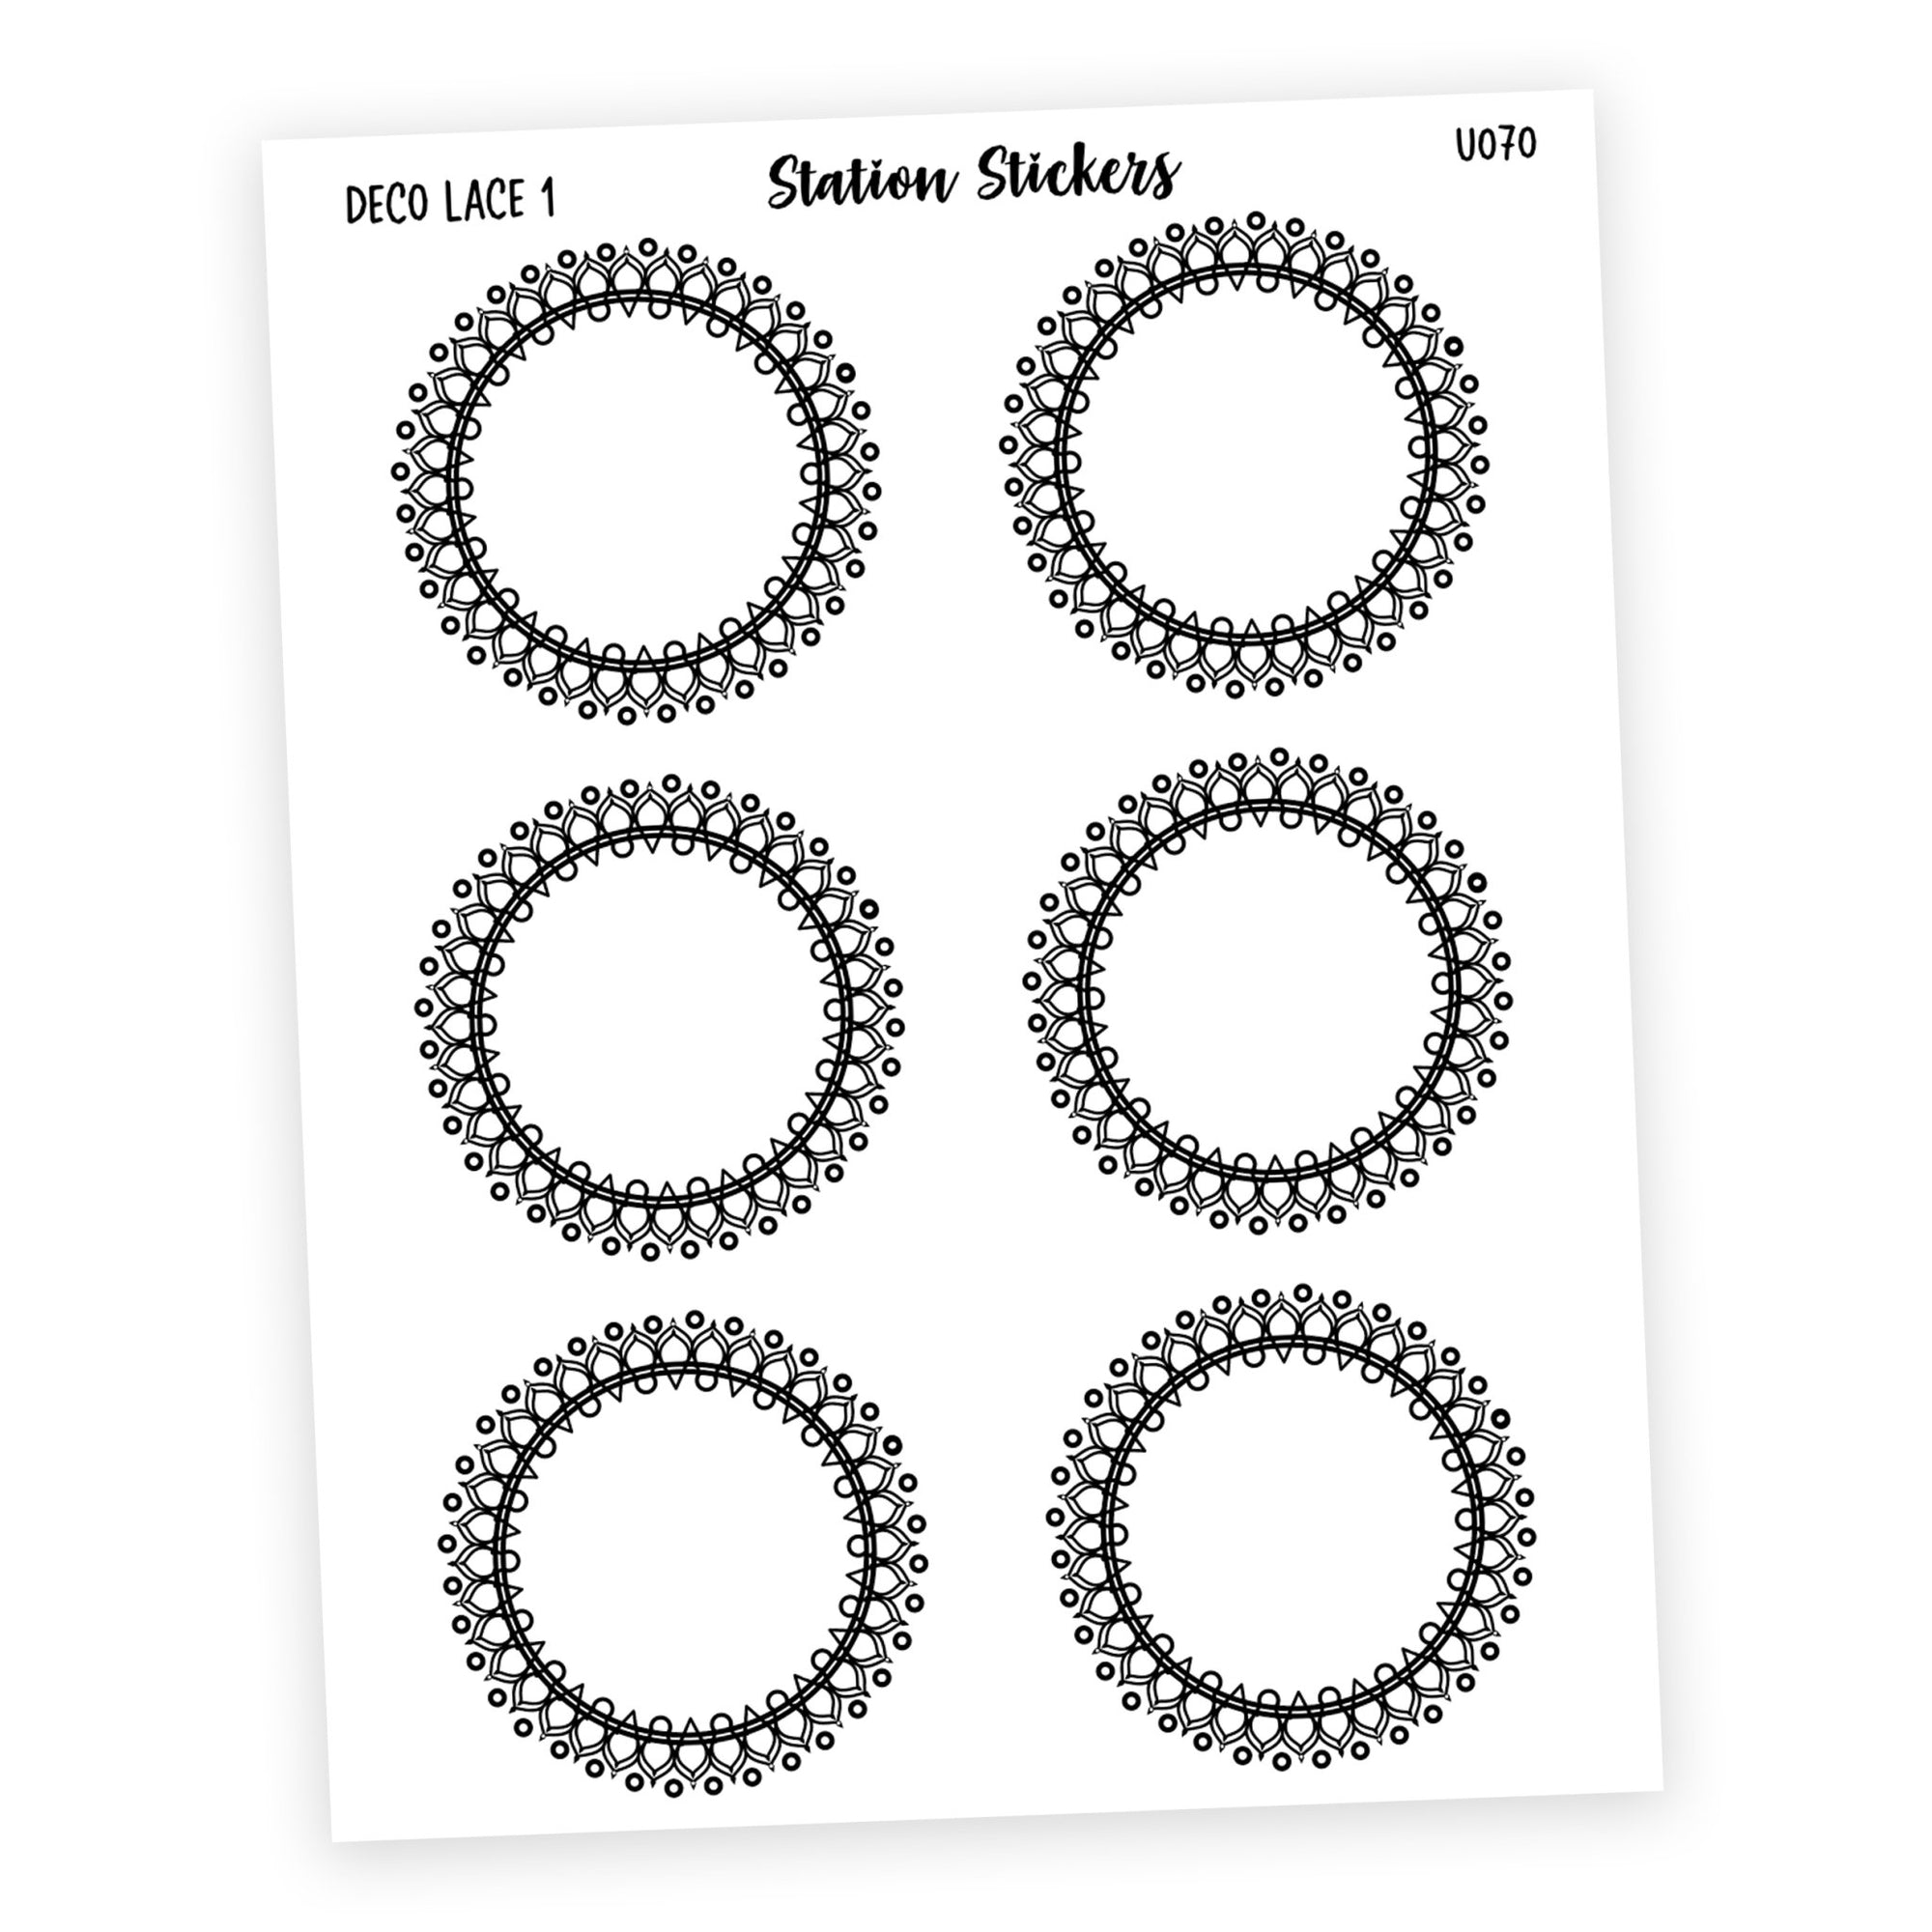 DECO • LACE 1 - Station Stickers